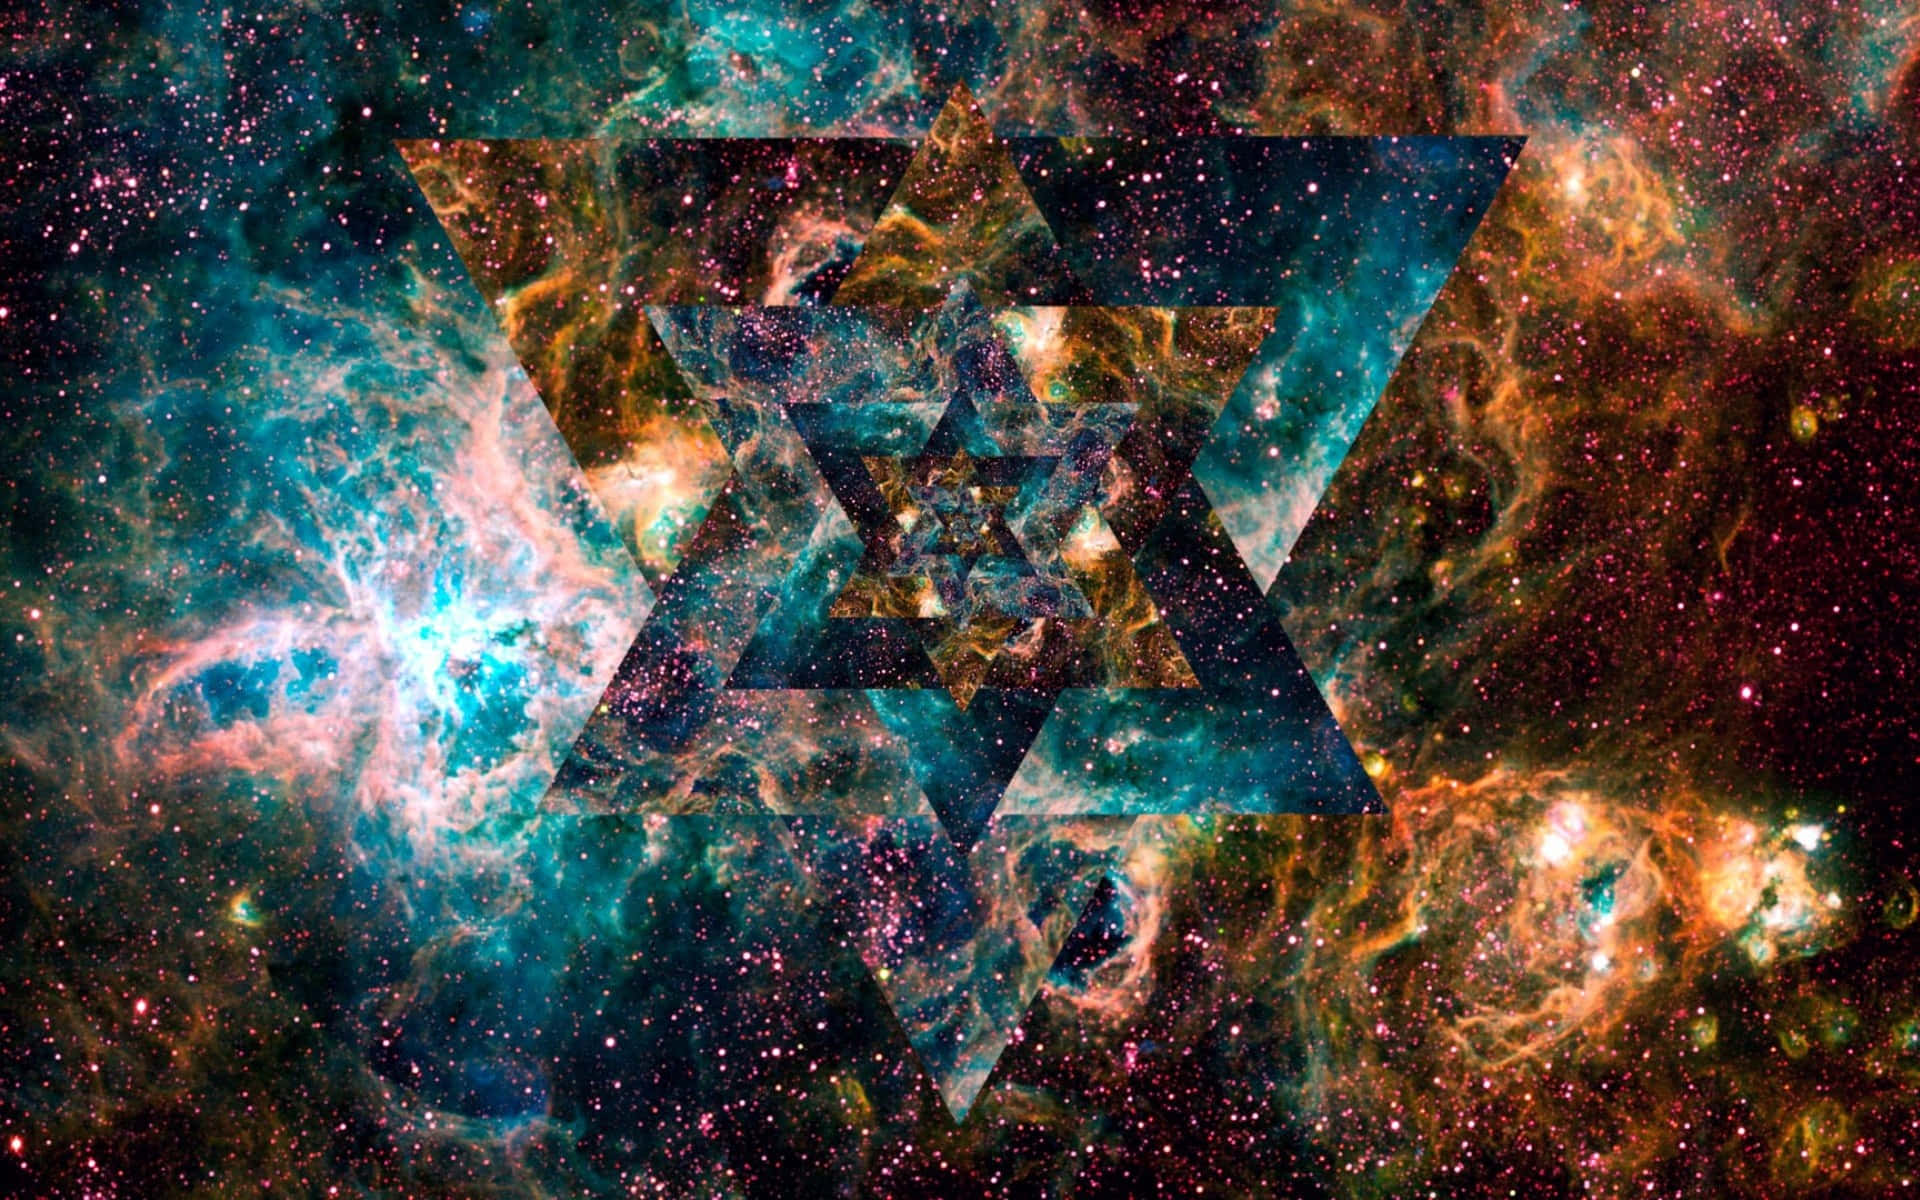 Experience the infinite beauty of the Trippy Galaxy Wallpaper